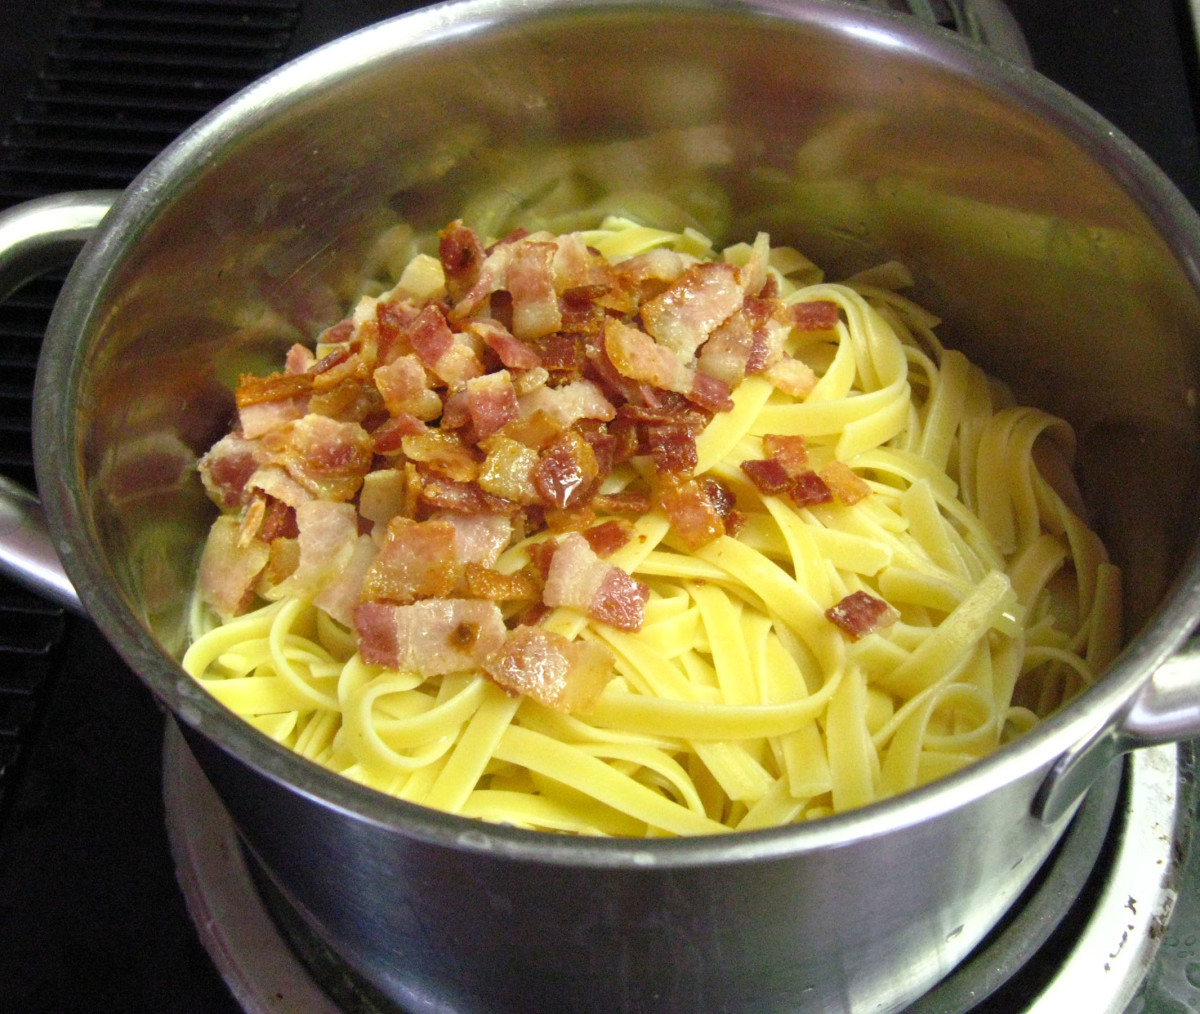 Drain the cooked pasta using a colander, and immediately pour the drained pasta back in the same hot pot it came from, keeping some cooking water. While stirring on medium heat, add the bacon with all its cooking juices and the egg mix. Stir.